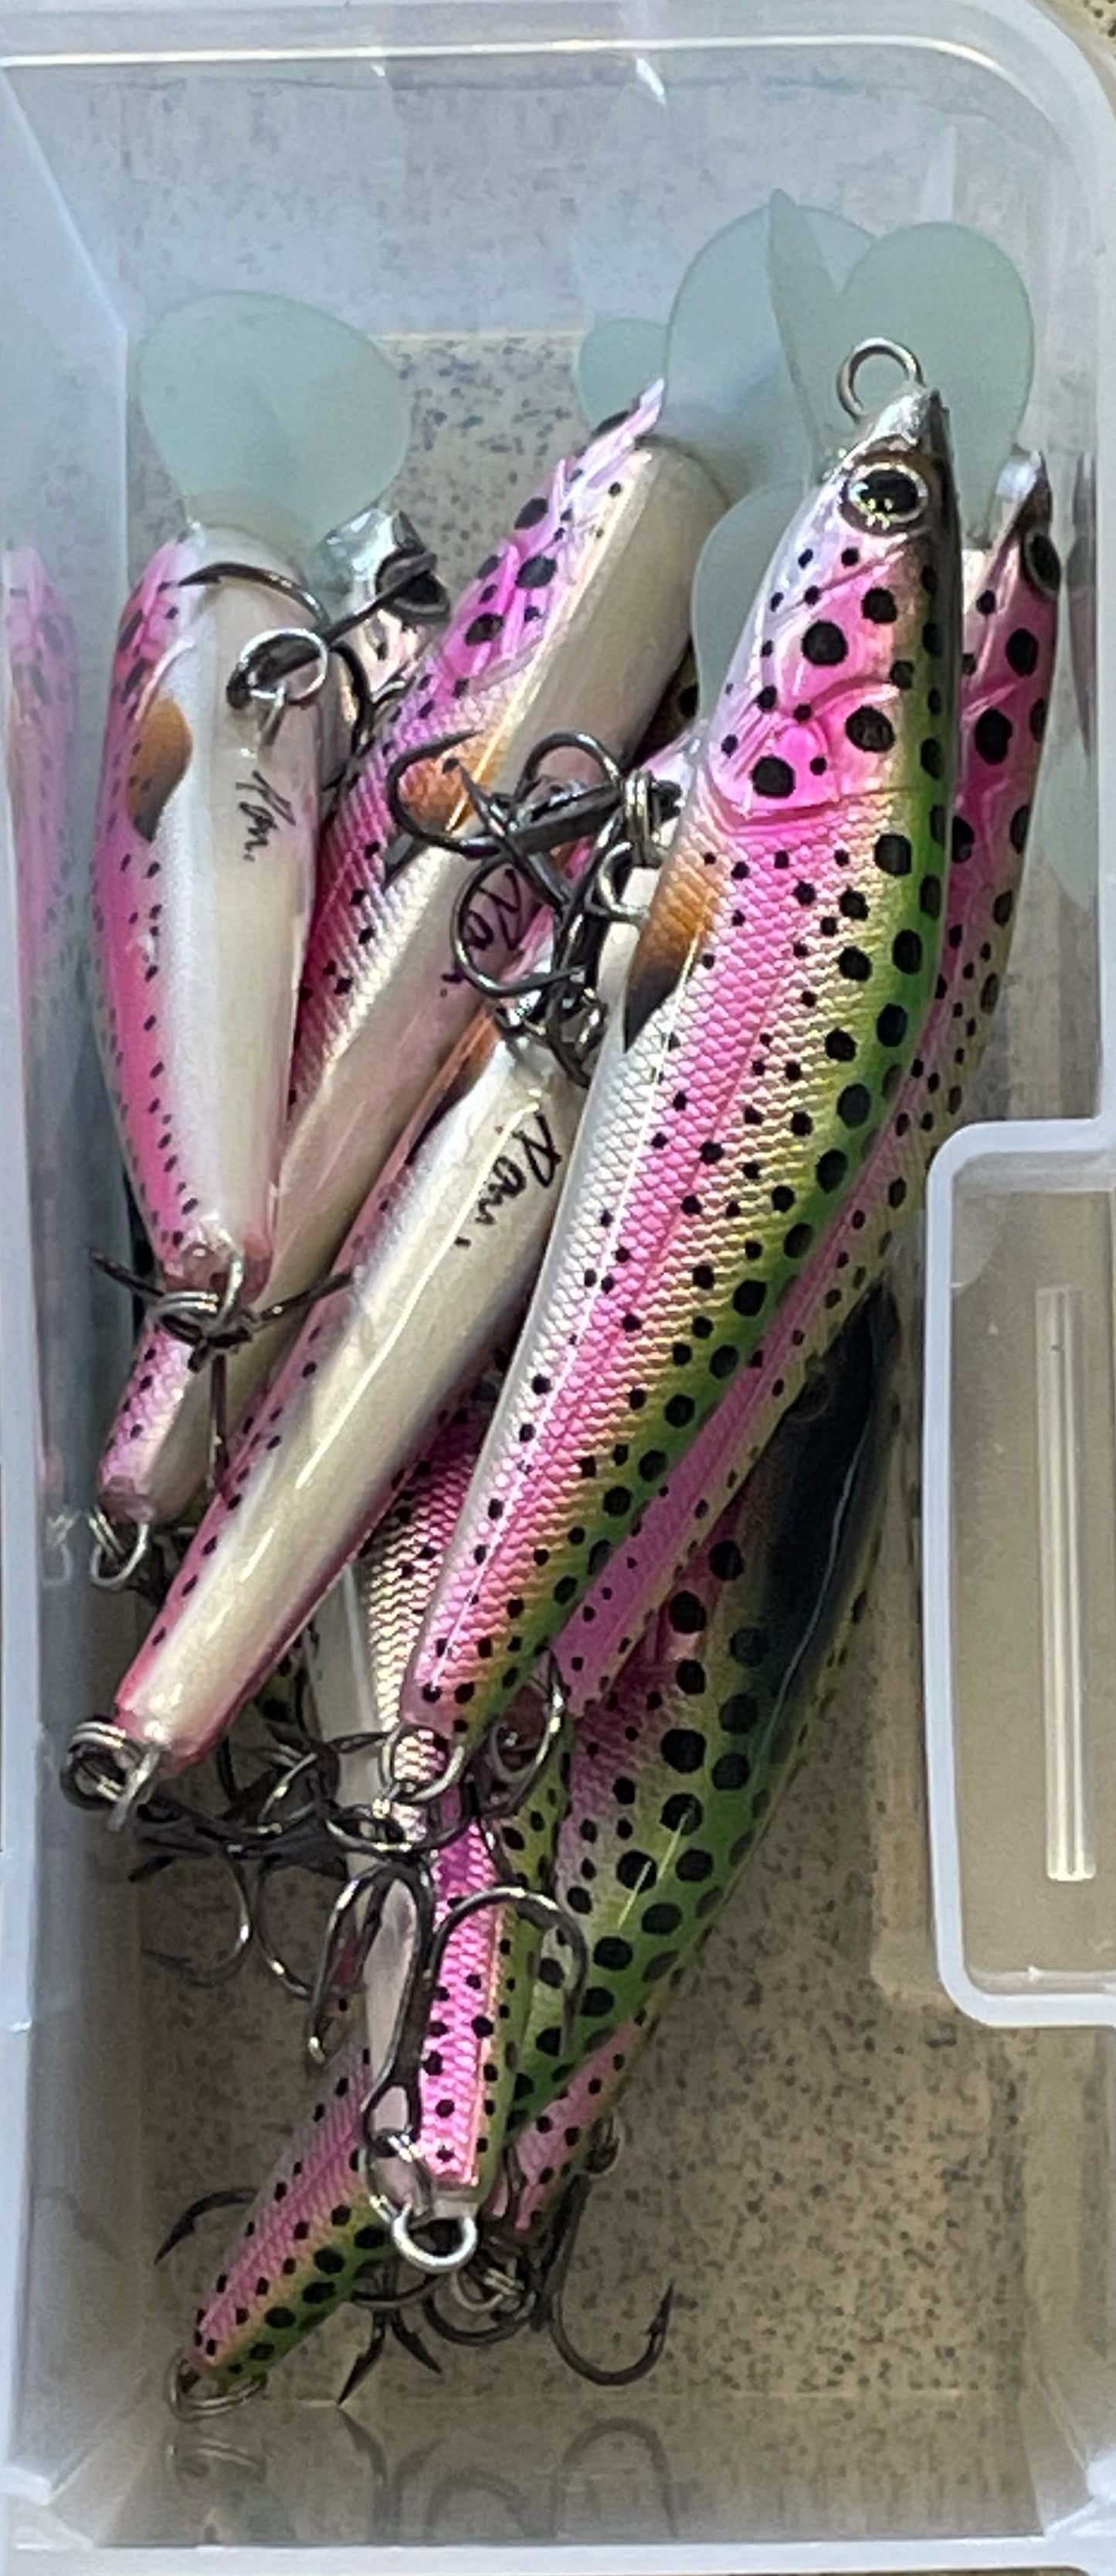 PAN Handmade Lures 72mm 8g Sinking - Rainbow Trout